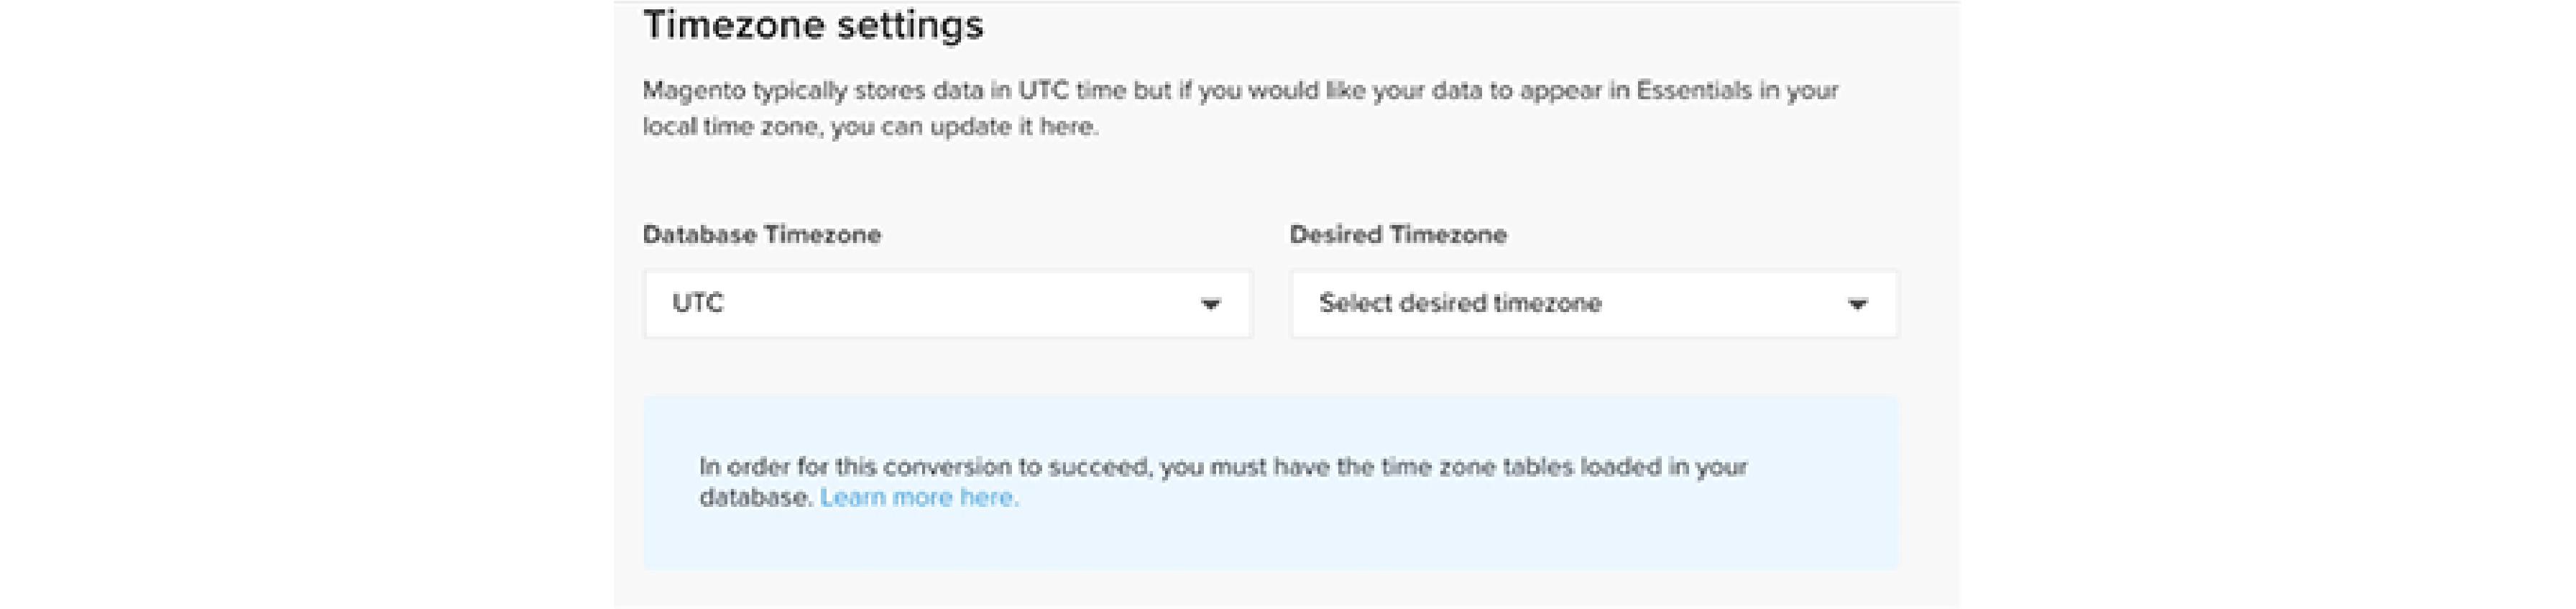 Adjusting Time Zone Settings in Magento Business Intelligence